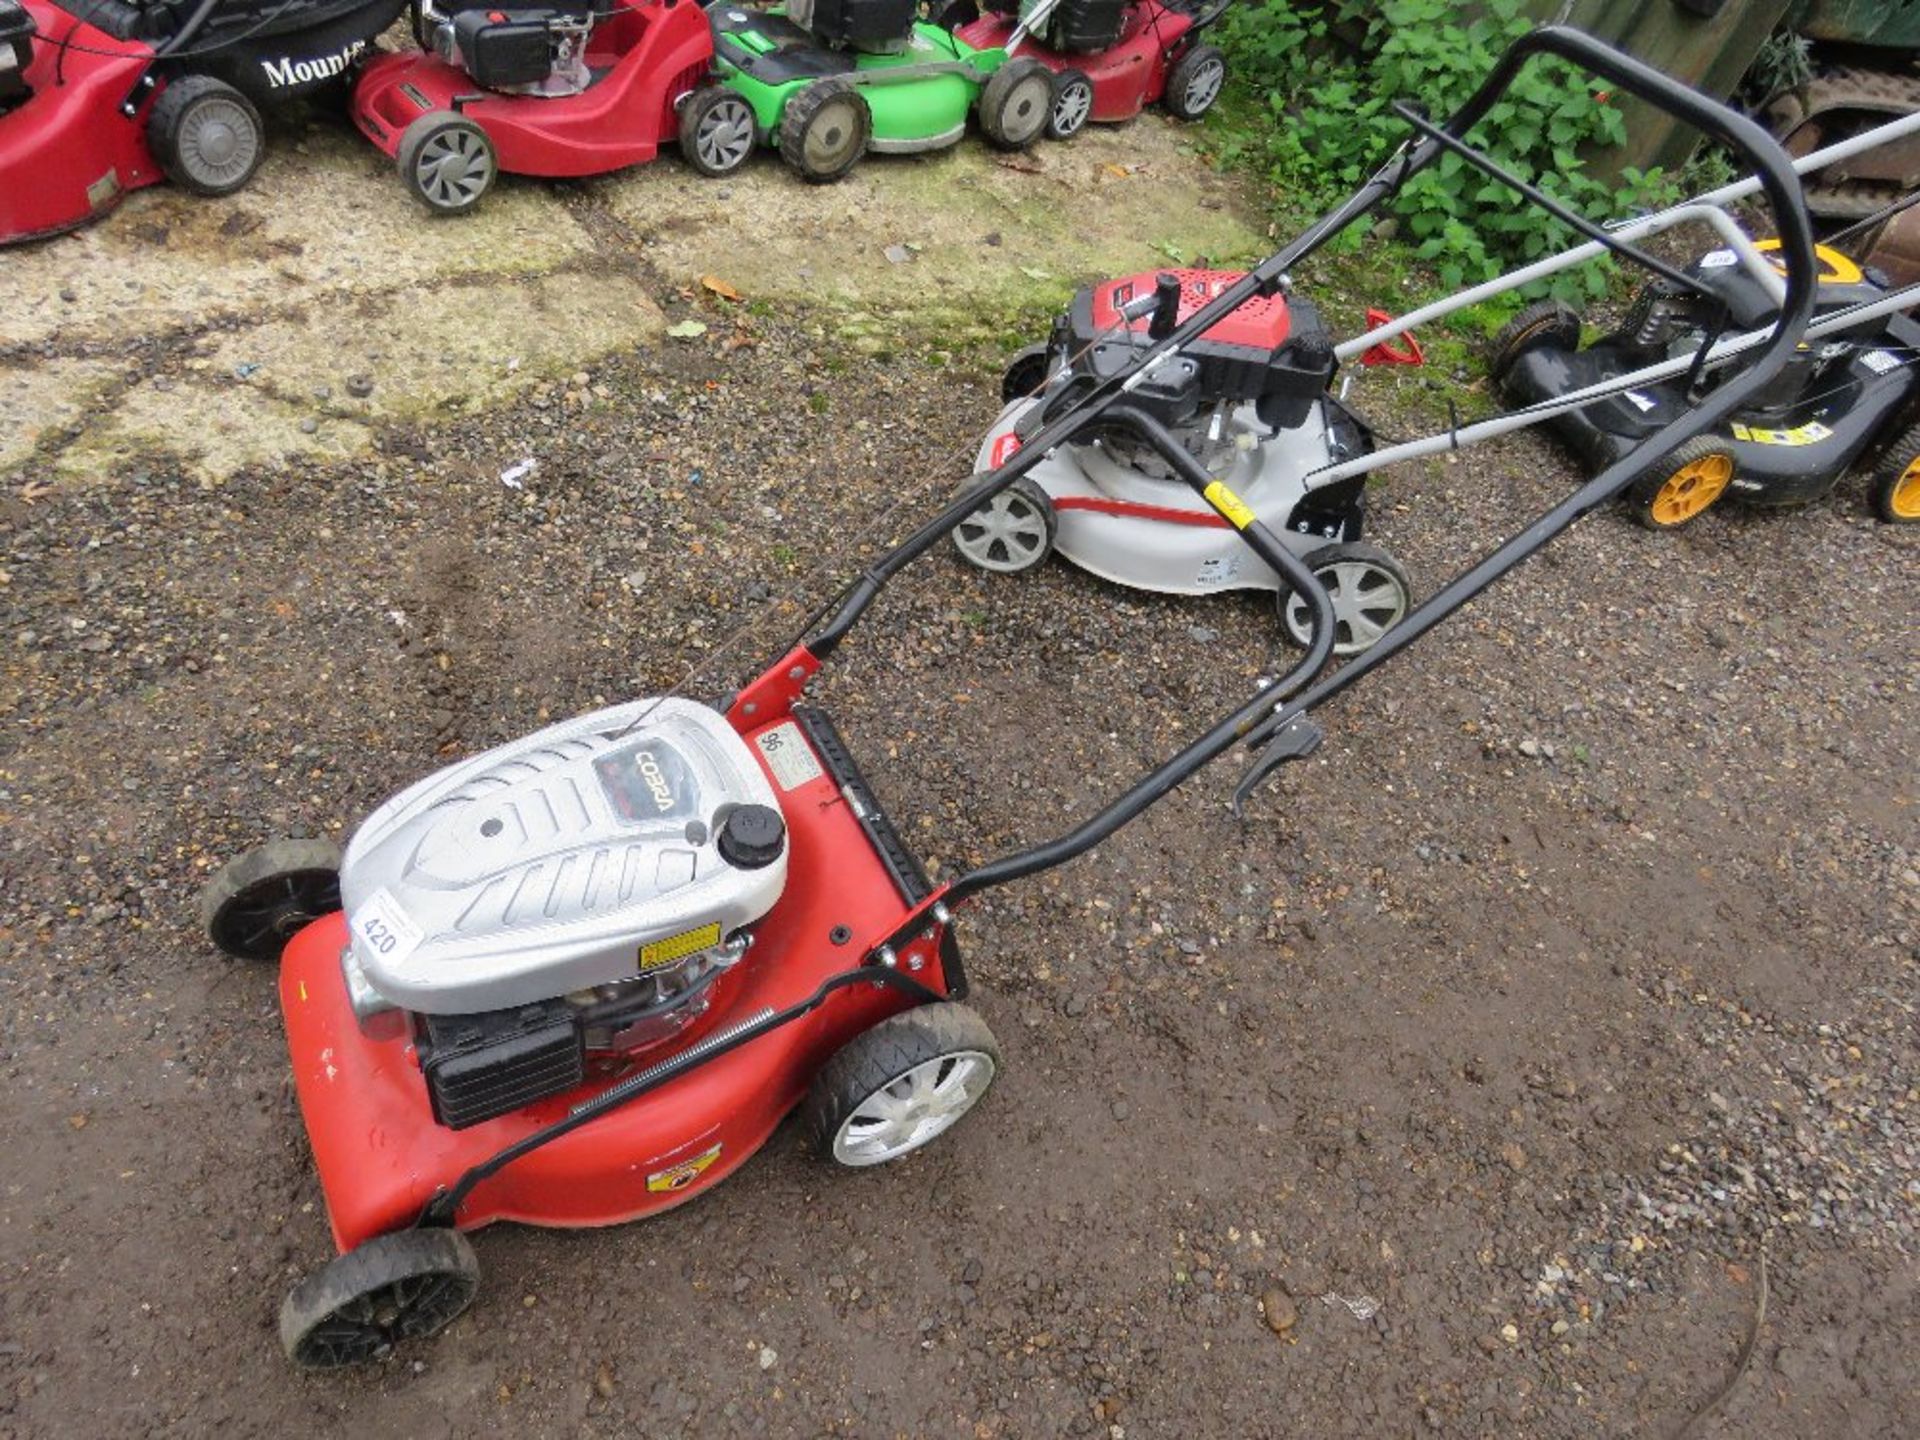 COBRA PETROL ENGINED ROTARY LAWNMOWER. NO COLLECTOR. THIS LOT IS SOLD UNDER THE AUCTIONEERS MARG